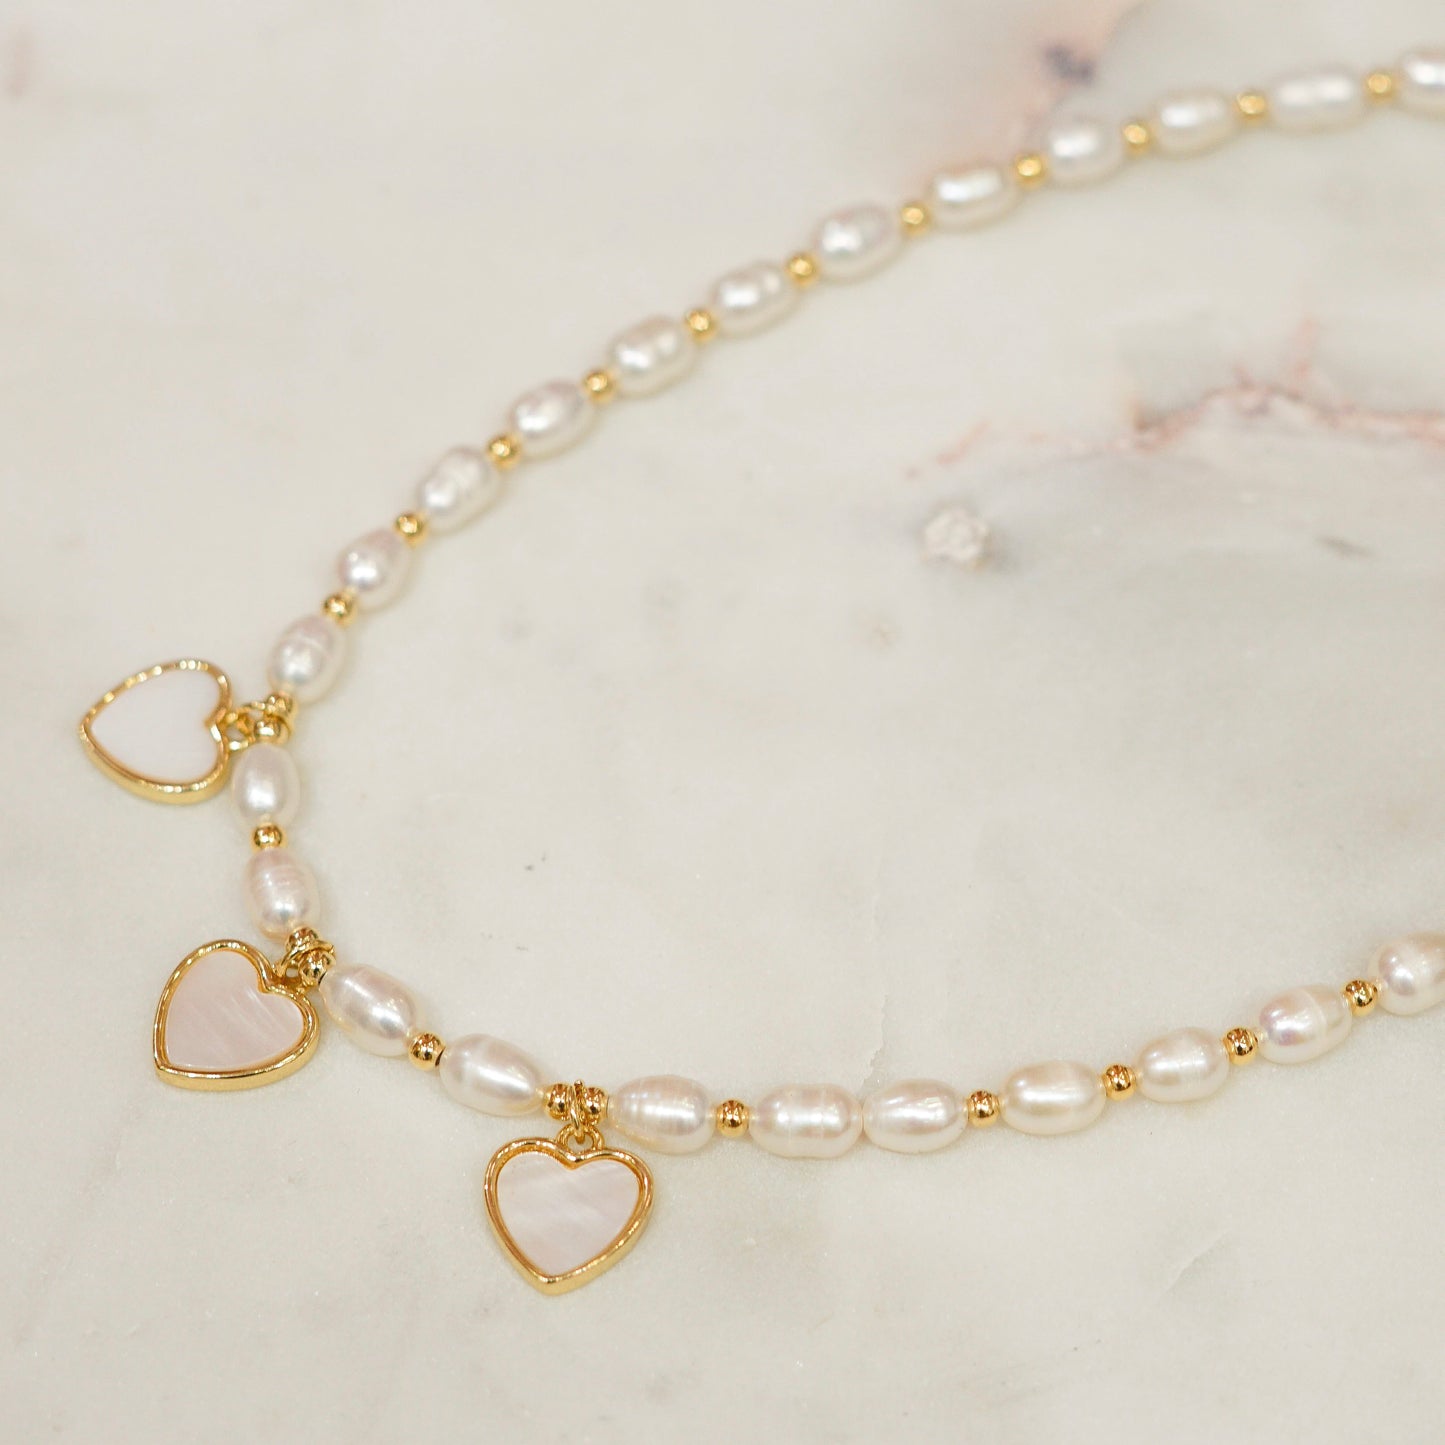 3 hearts pearls necklace